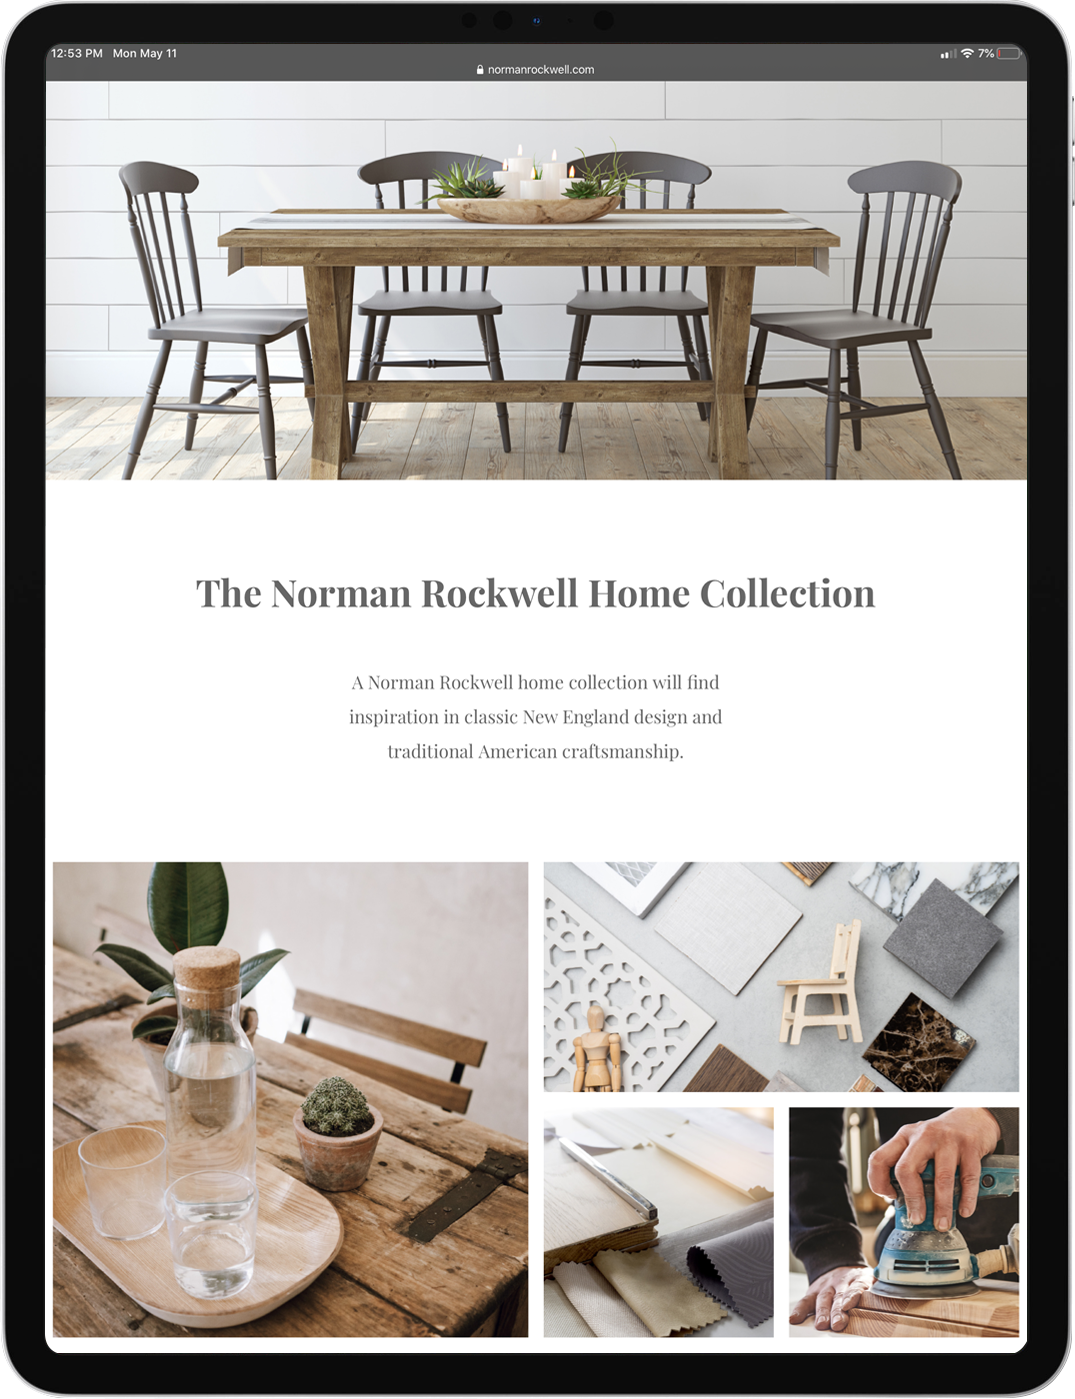 Norman Rockwell Brand Vision and Website Design Home Collection